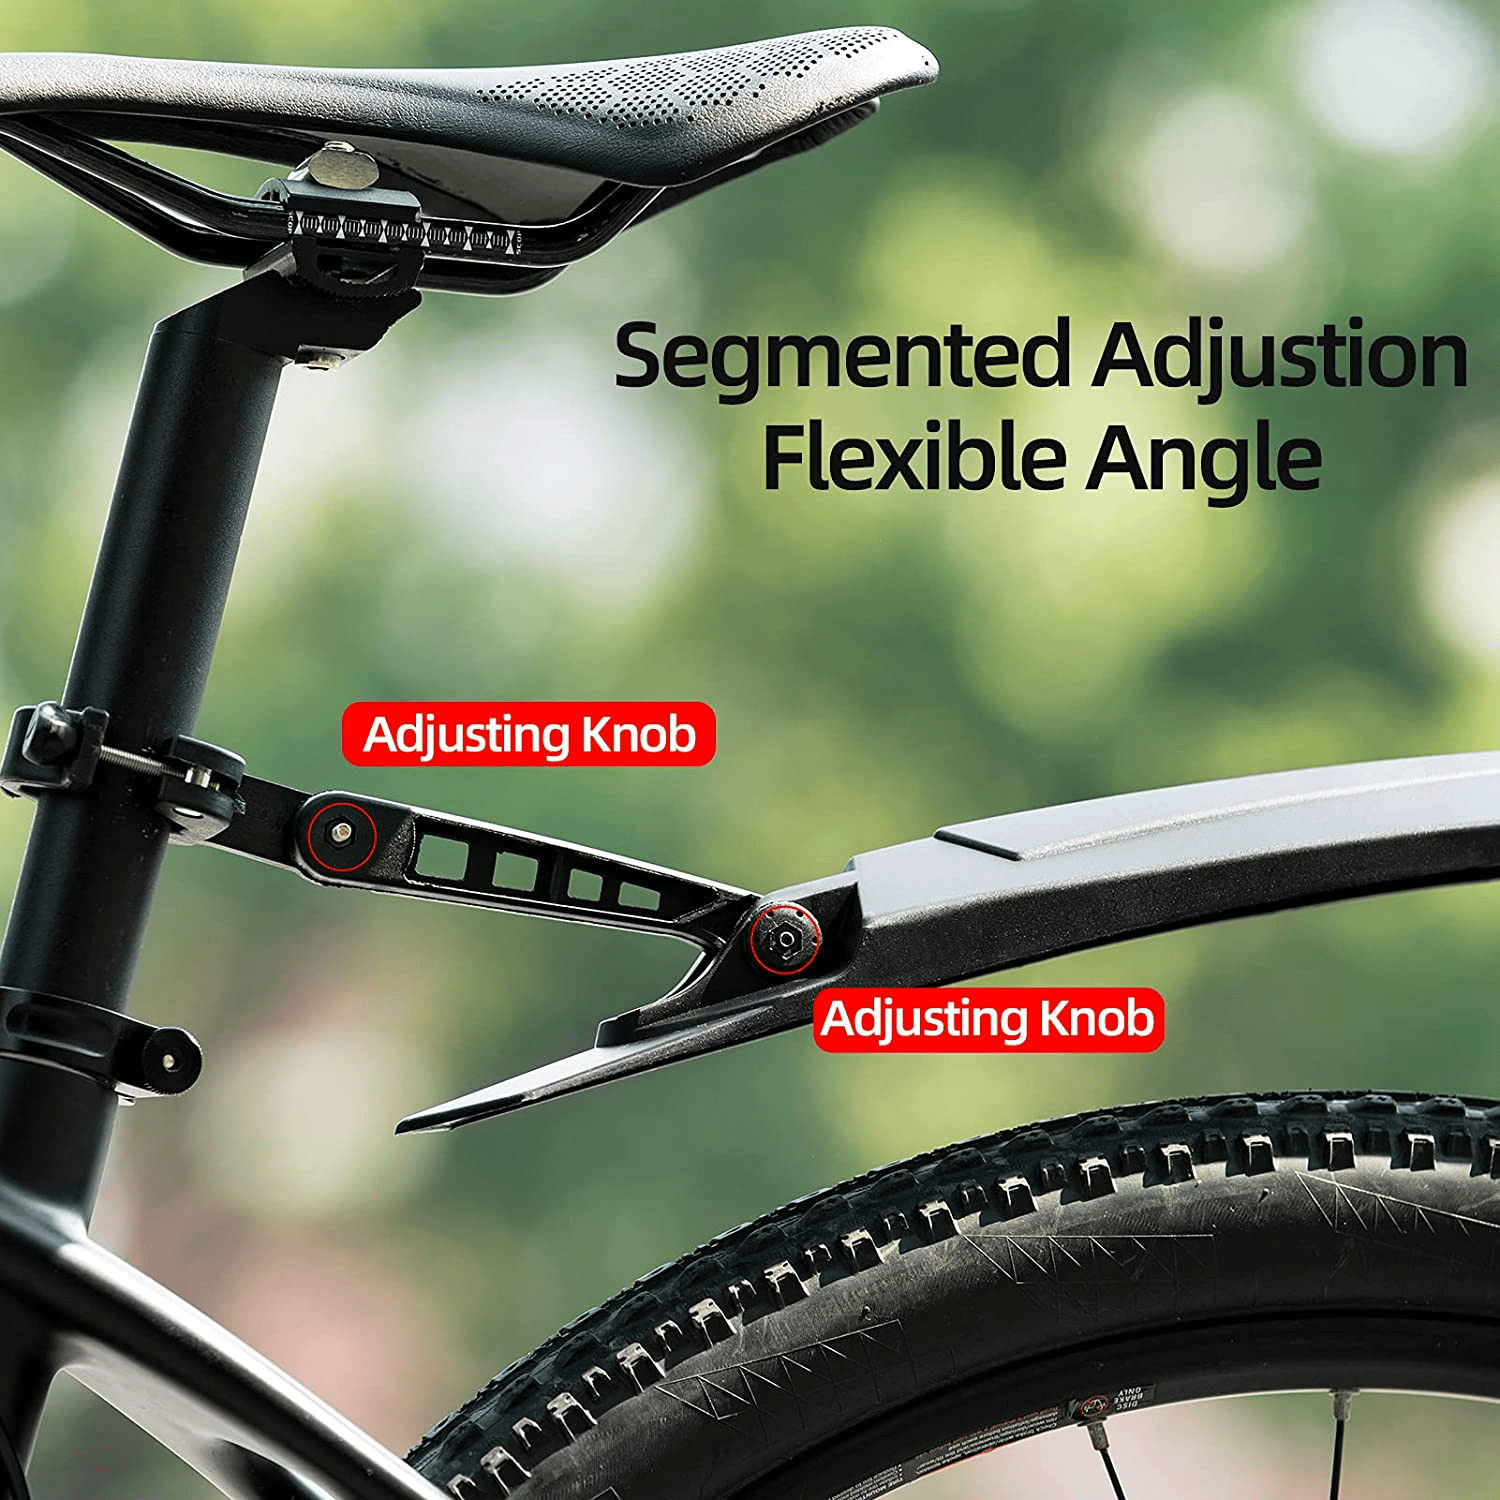 Adjustable fenders like these are versatile enough to use on just about any mountain bike.